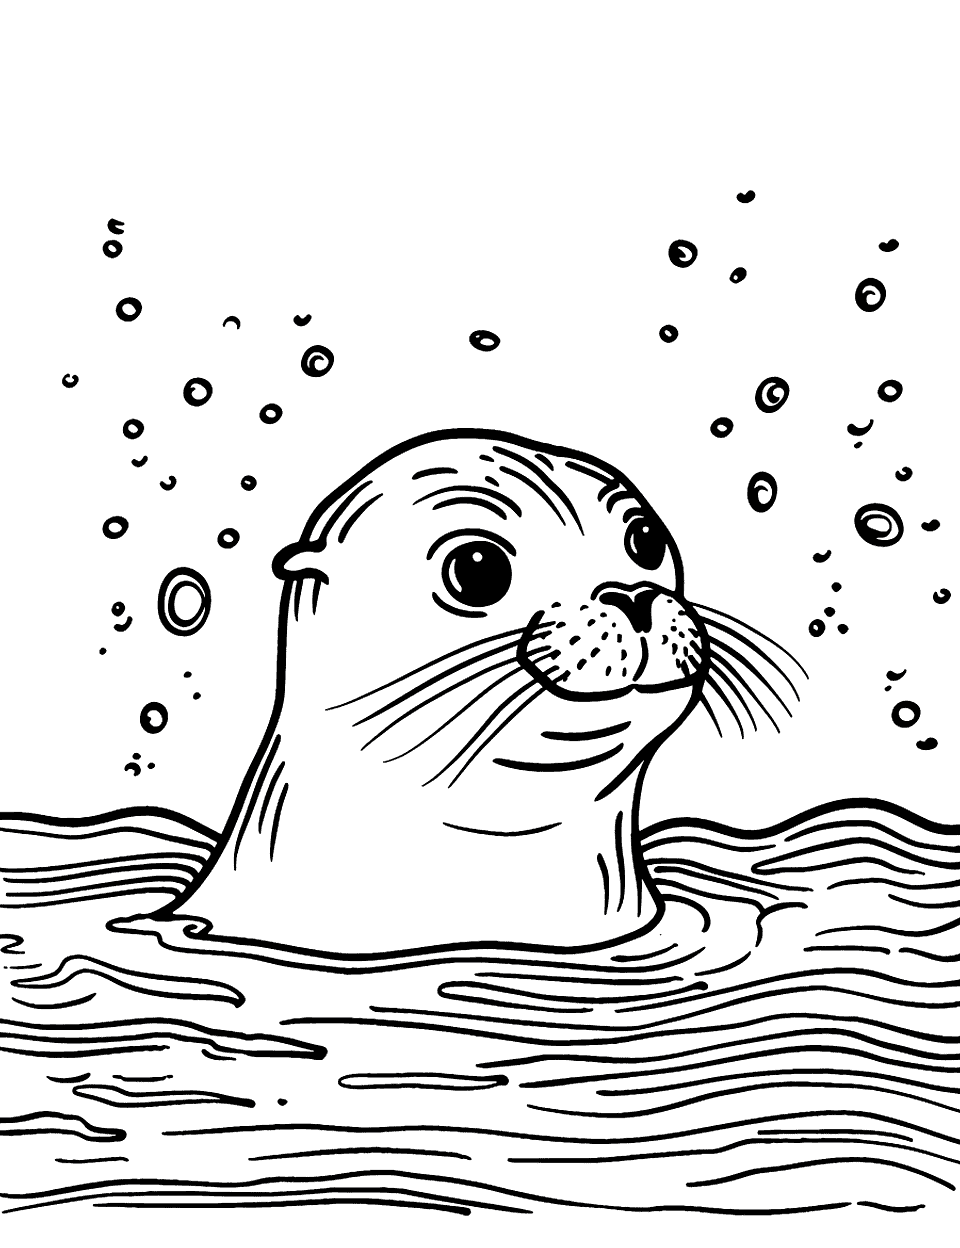 Seal Popping Up from the Water Sea Creature Coloring Page - A seal’s head emerges from the water, curiously watching its surroundings.